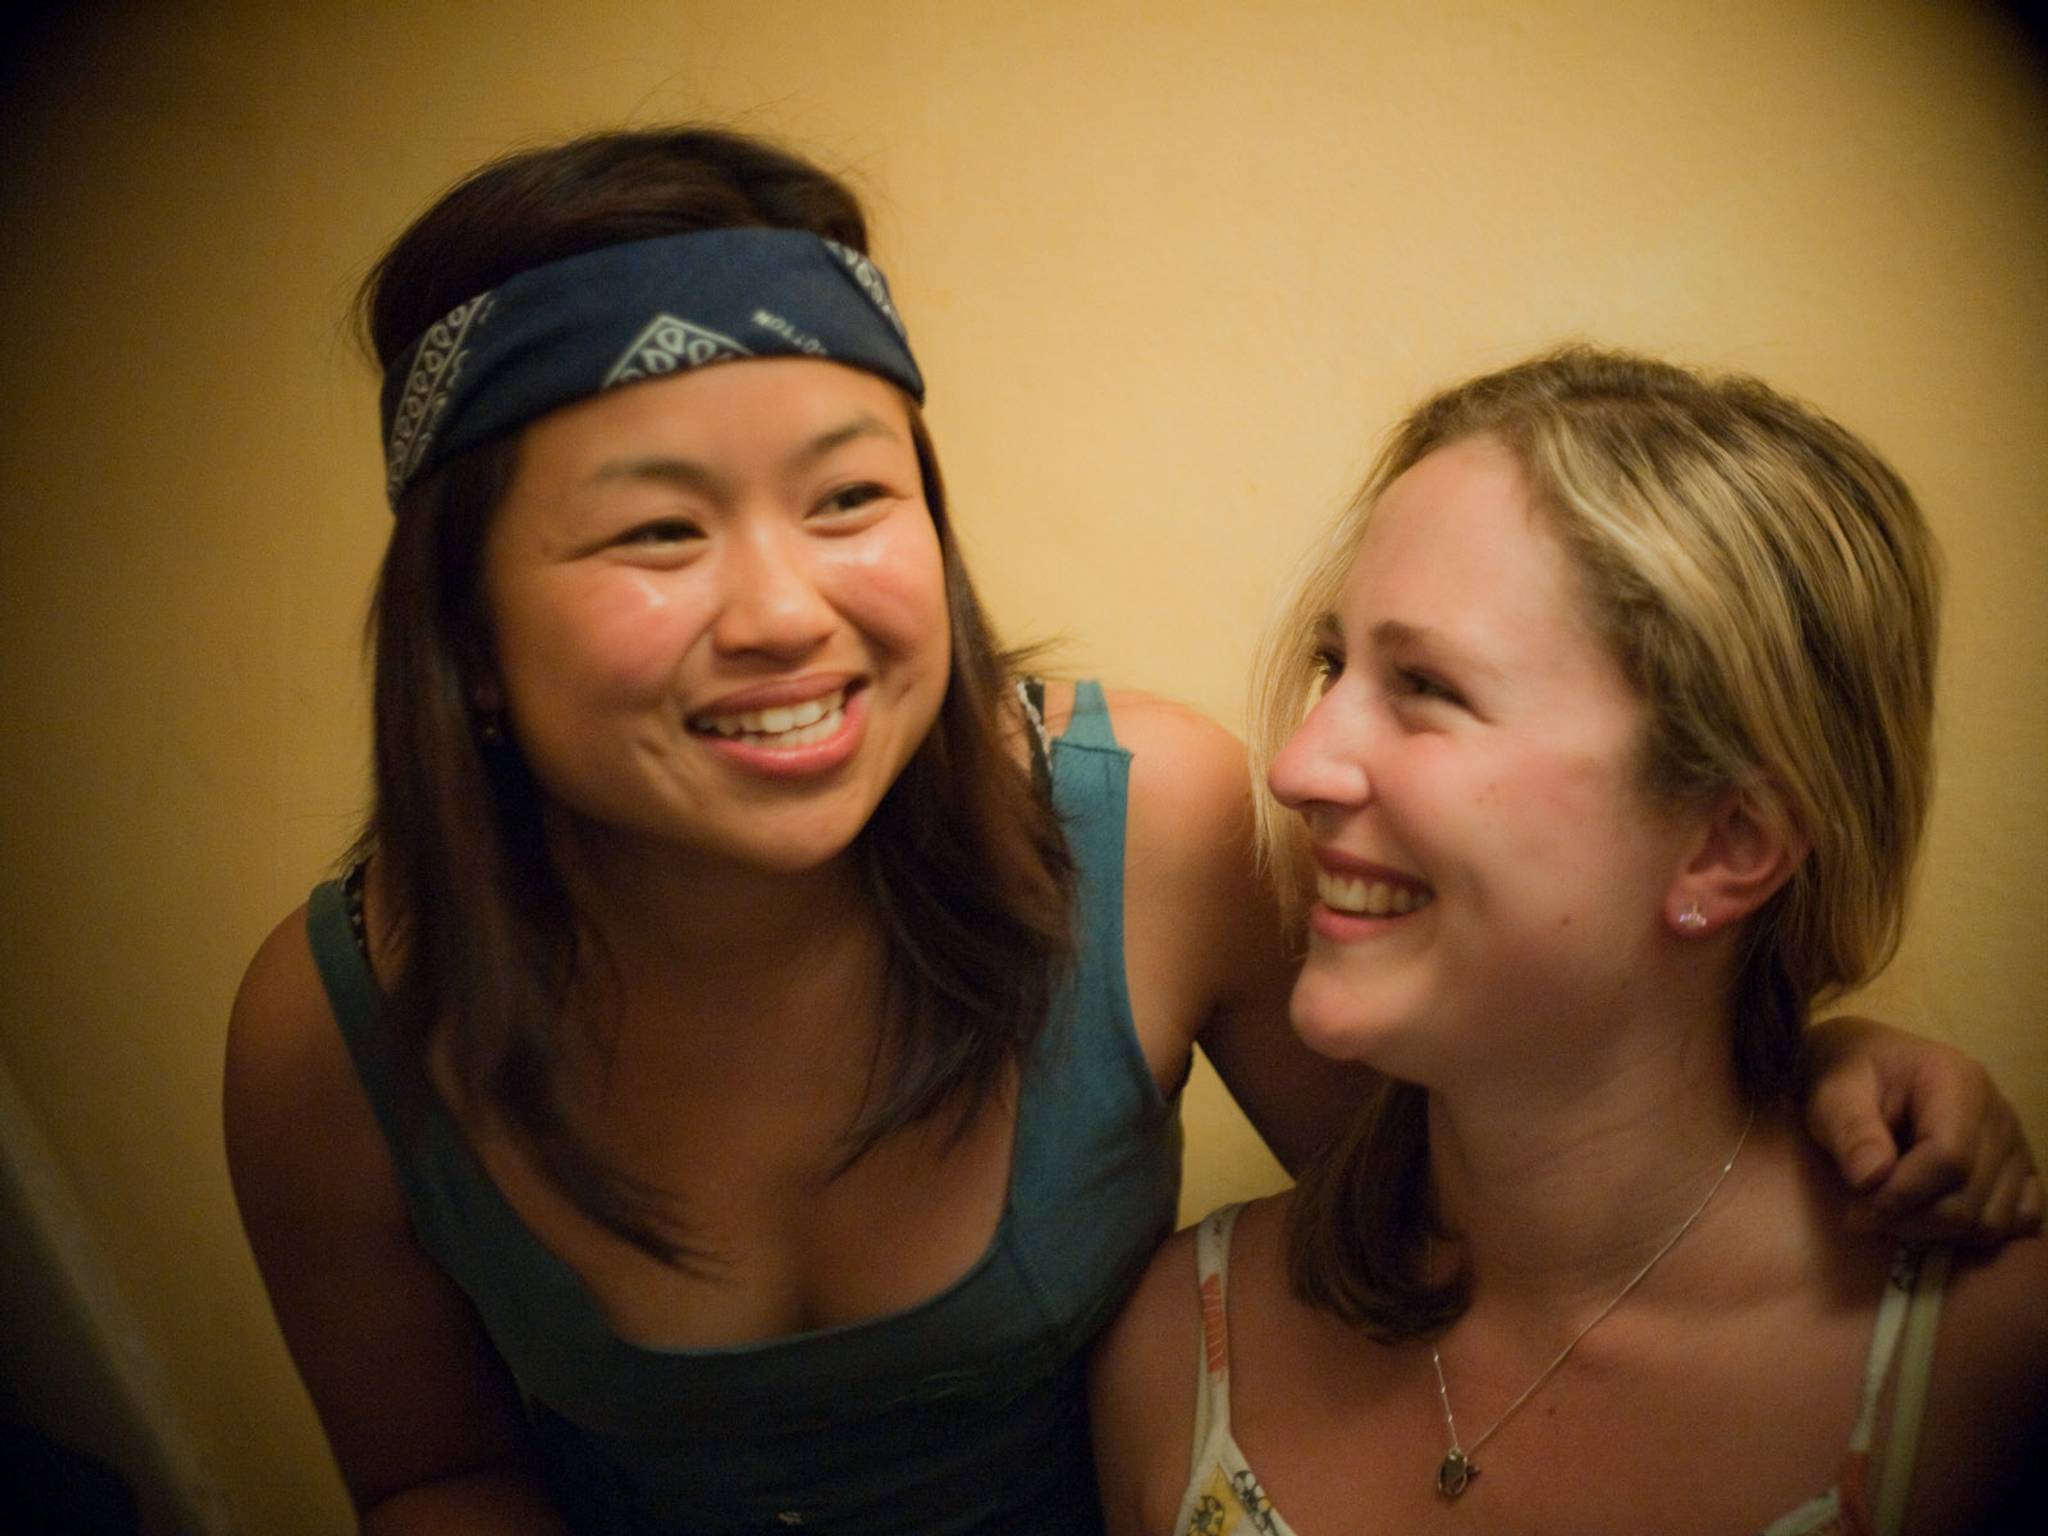 Roomi will help you find your perfect roommates